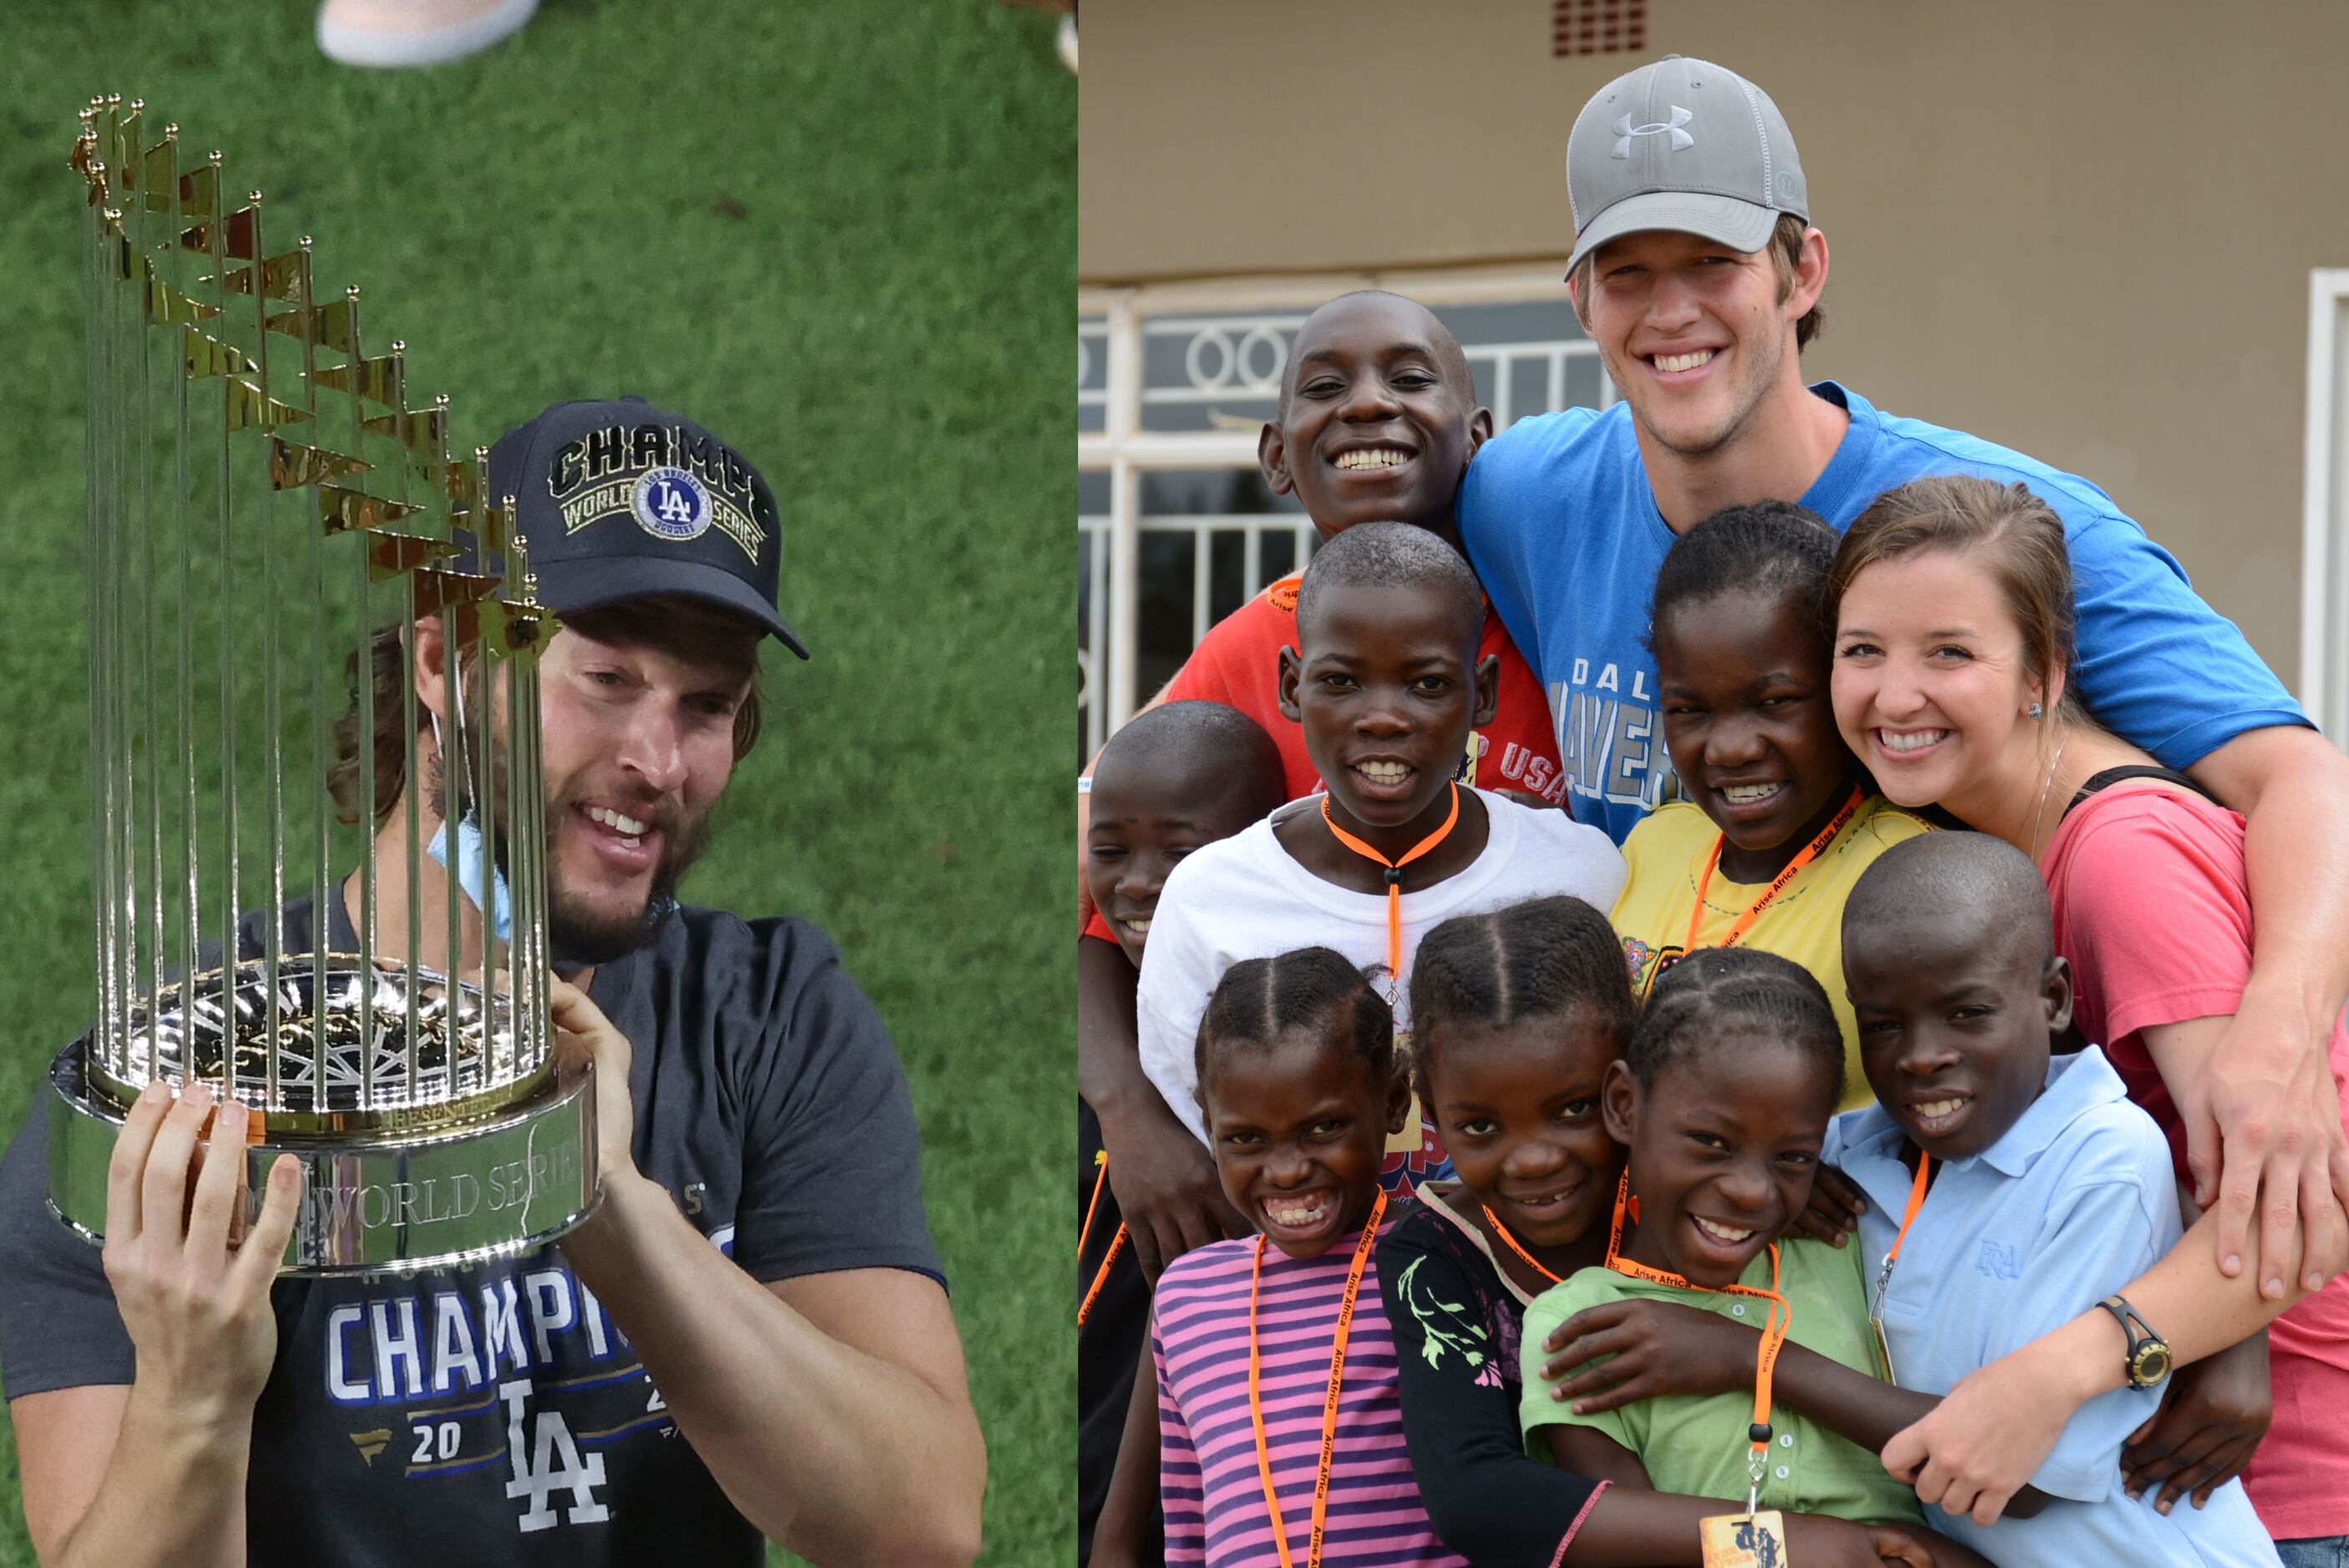 For Baseball Star Clayton Kershaw And His Wife, Faith Provides A